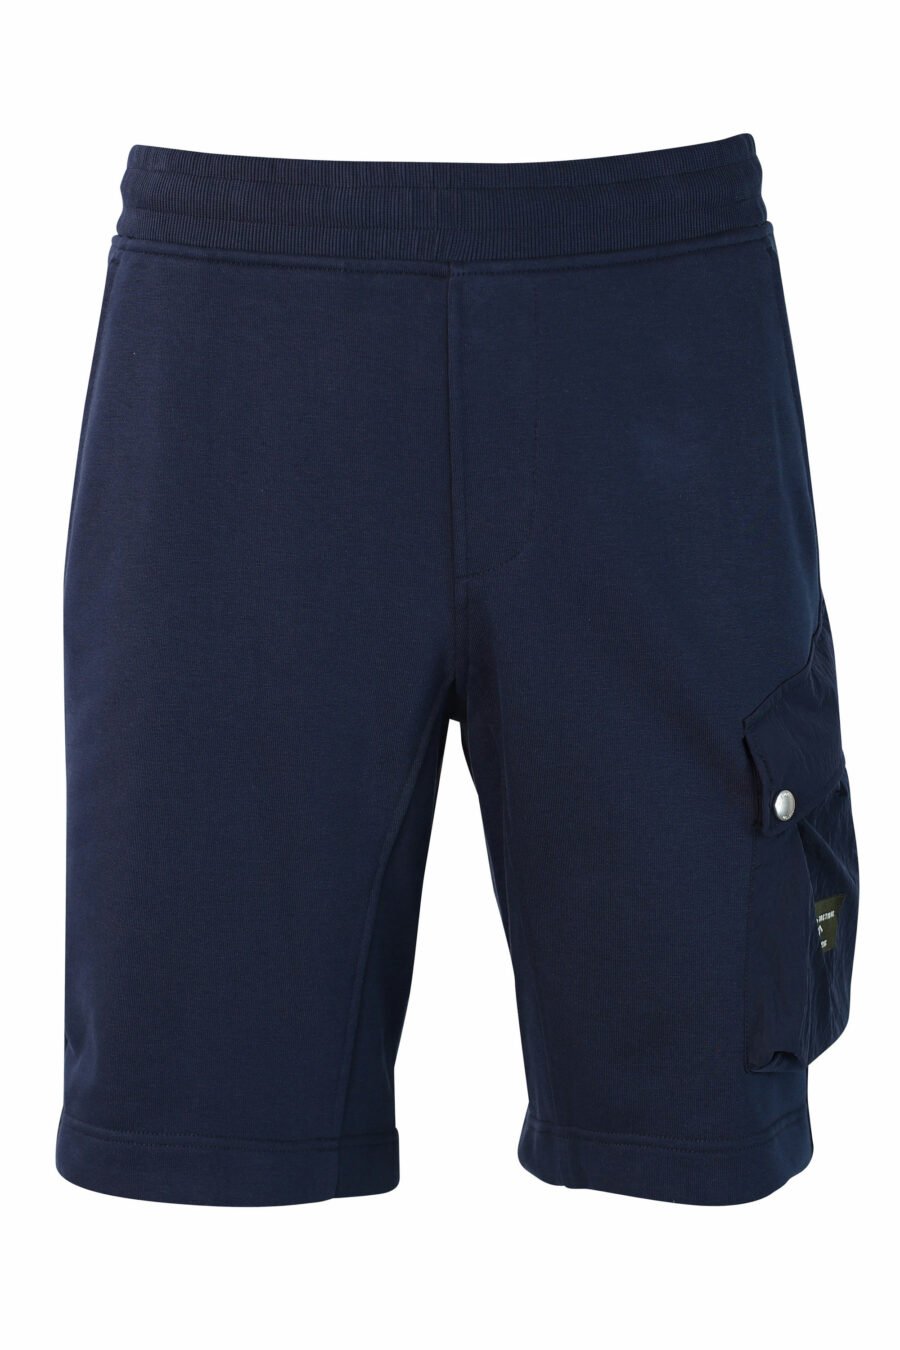 Tracksuit bottoms blue with side pocket - IMG 9872 1